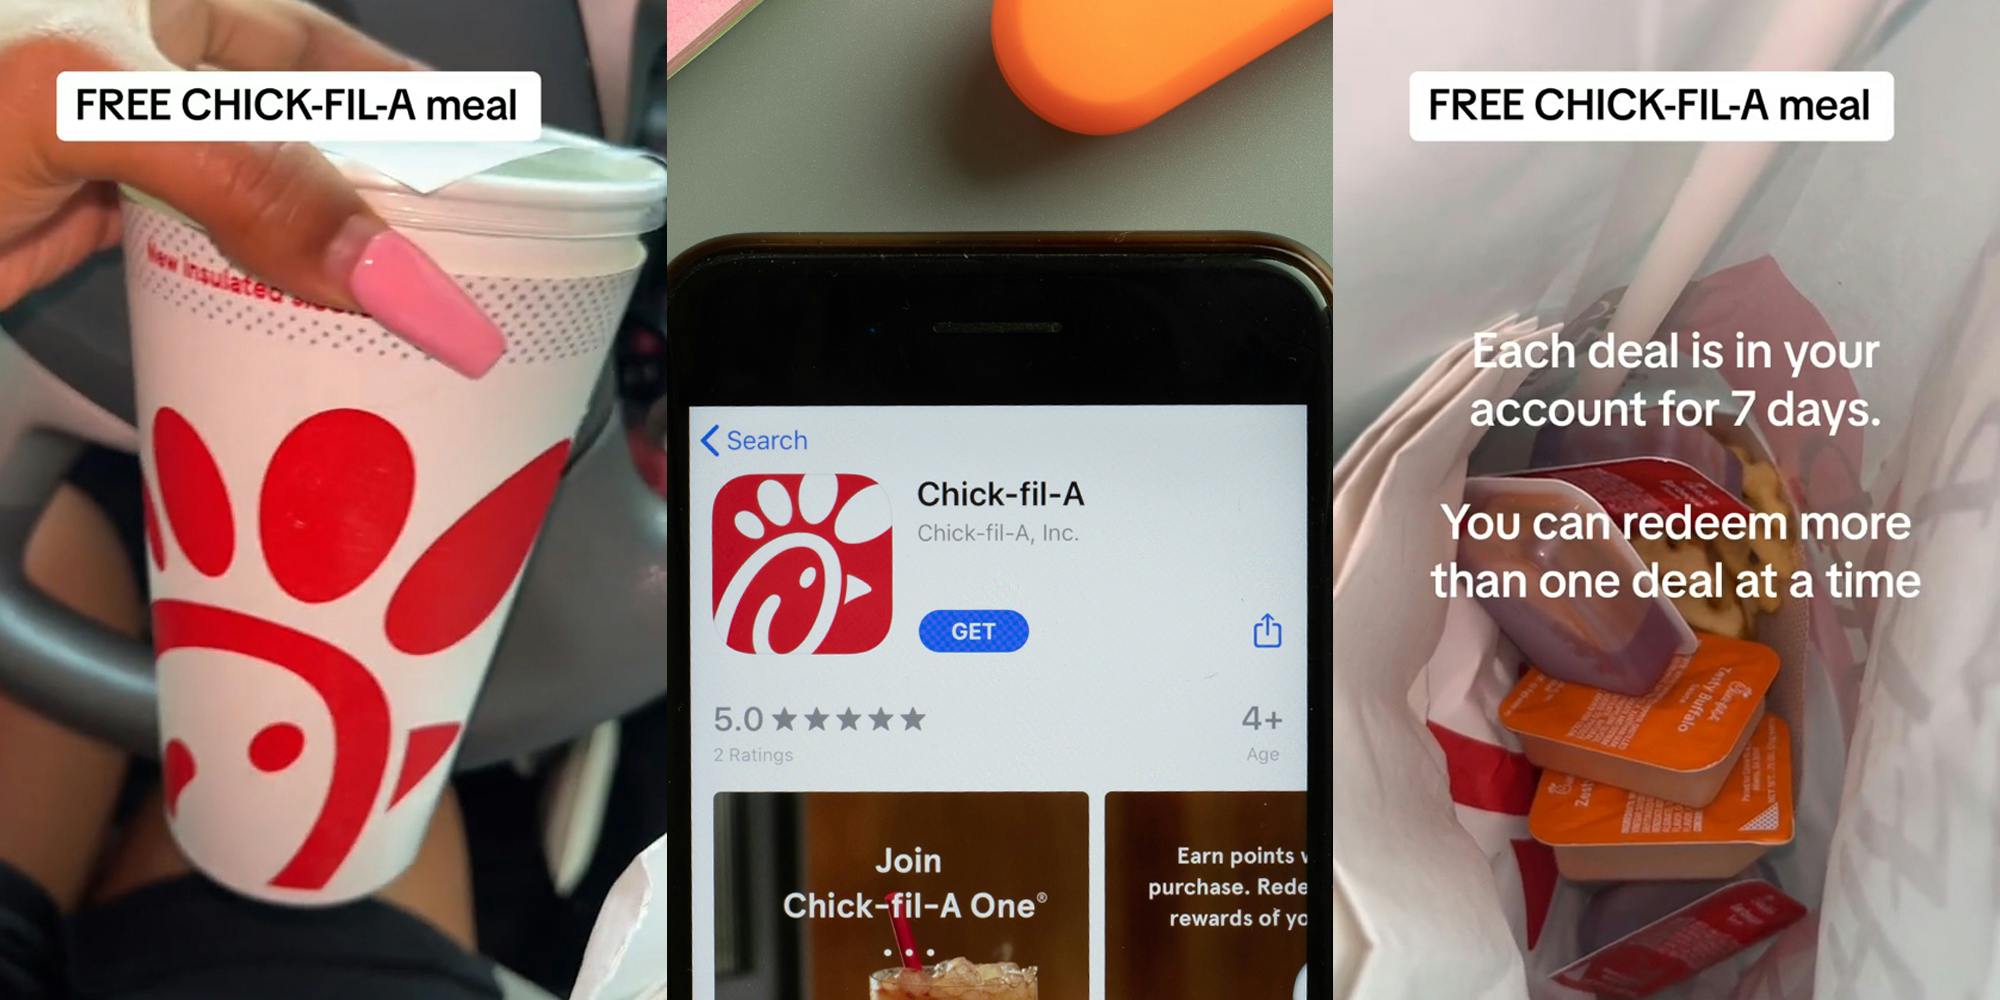 Chick-fil-A customer holding drink in car with caption "FREE CHICK-FIL-A meal" (l) Chick-fil-A app in Appstore on phone screen in front of green background (c) Chick-fil-A food in bag in car with caption "FREE CHICK-FIL-A meal" "Each deal is in your account for 7 days. You can redeem more than one deal at a time" (r)